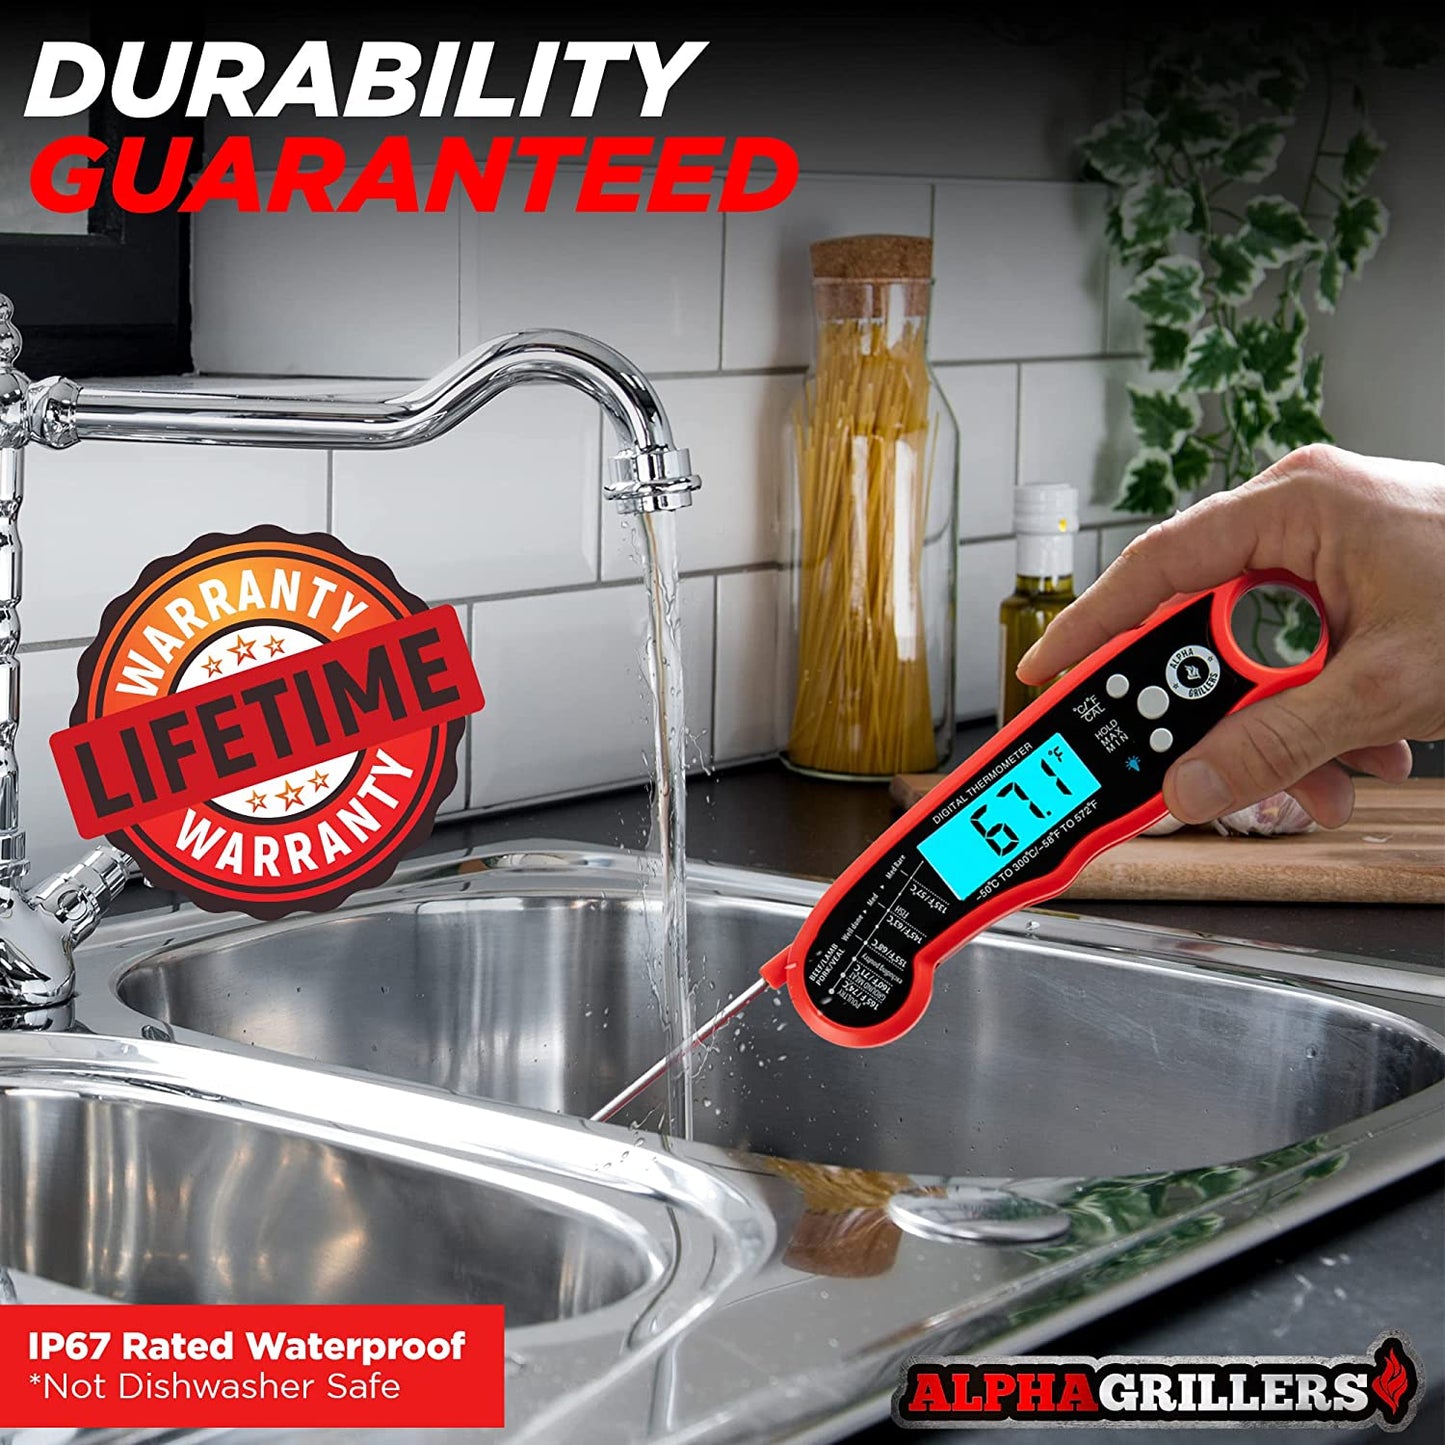 High-Quality Waterproof Instant Read Thermometer for Grilling and Cooking. Ultra-Fast, Backlit, and Calibrated Digital Food Probe Ideal for Kitchen, Outdoor Grilling, and BBQ.